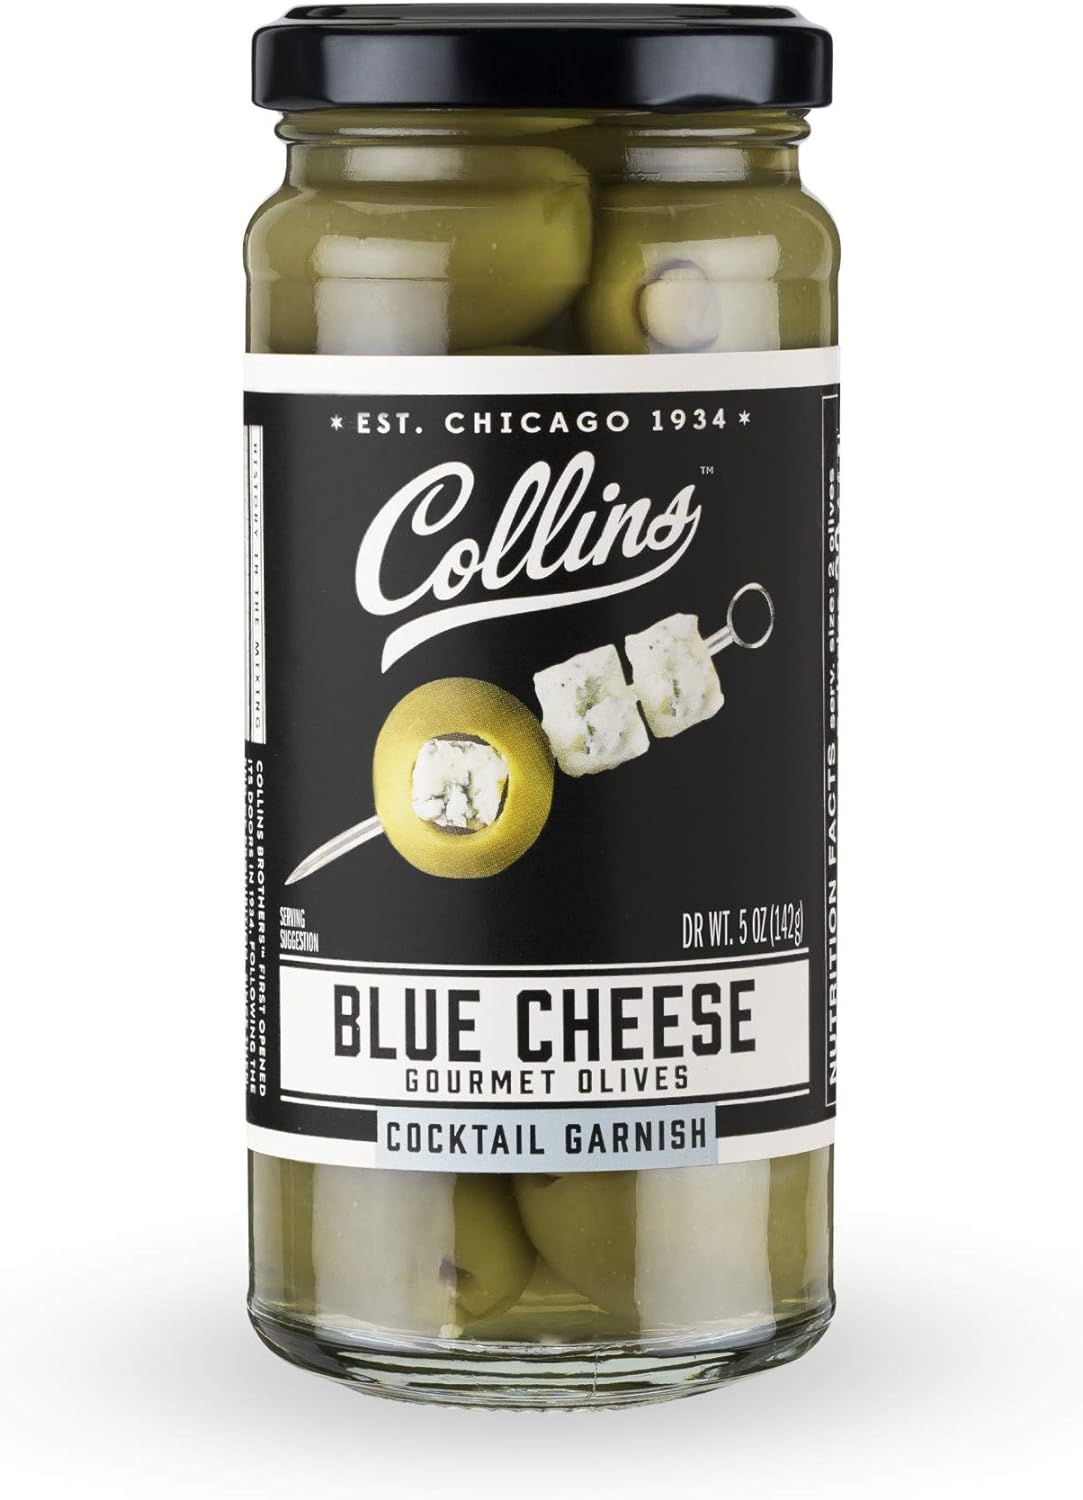 Collins Gourmet Blue Cheese Olives, Premium Stuffed-Cheese Garnish for Cocktails, Martinis, Bloody Marys, Snack Trays, Charcuterie, and Salads, Condiment Olives, 4.5 Oz: Home & Kitchen